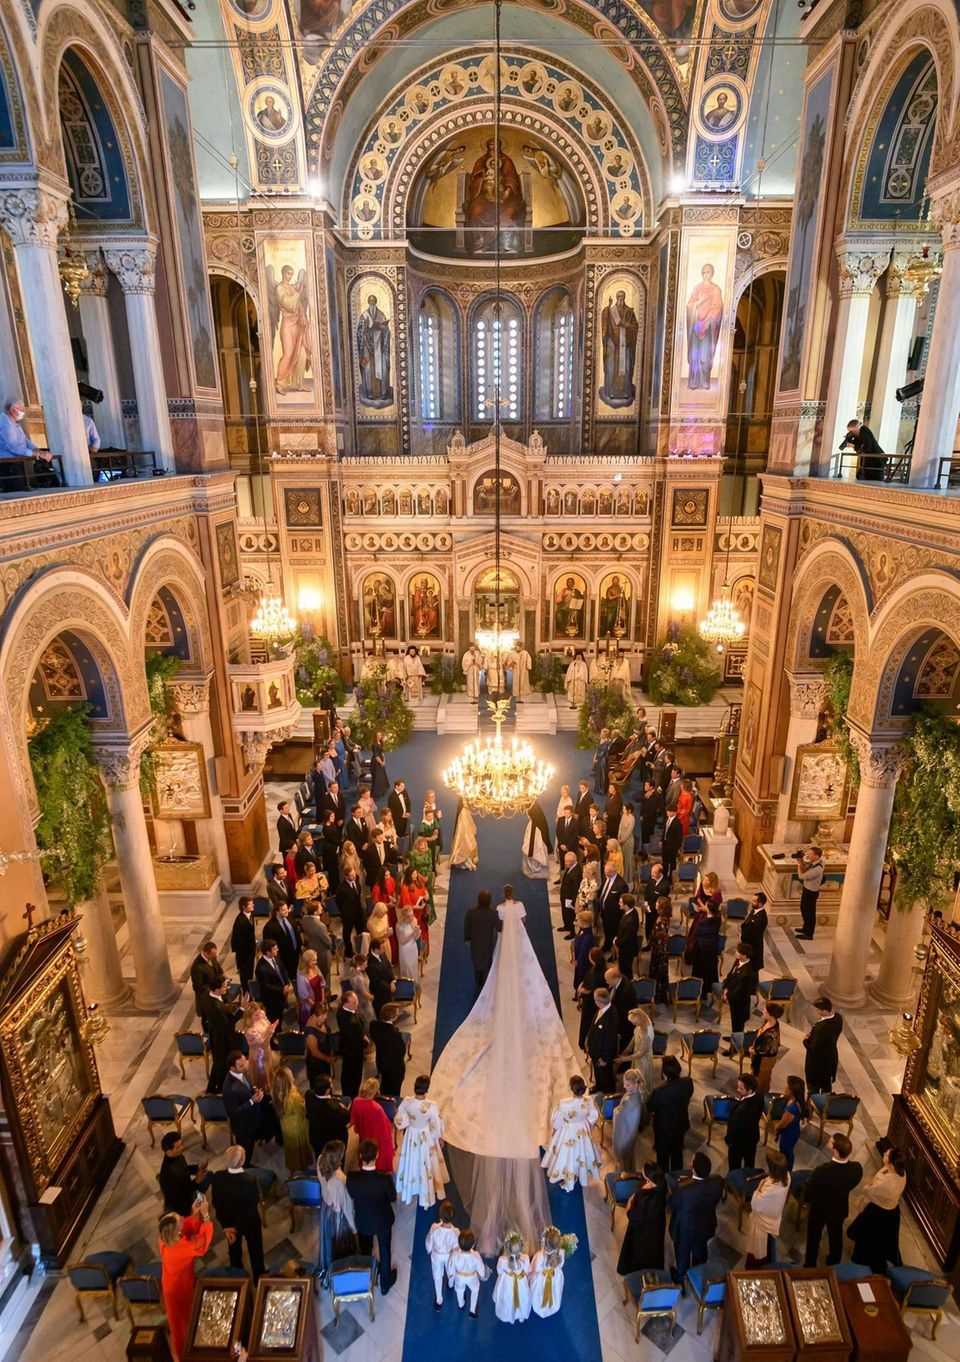 Nina Flohr and Prince Philippos at their church wedding in the Cathedral of the Annunciation in Athens, on October 23, 2021.